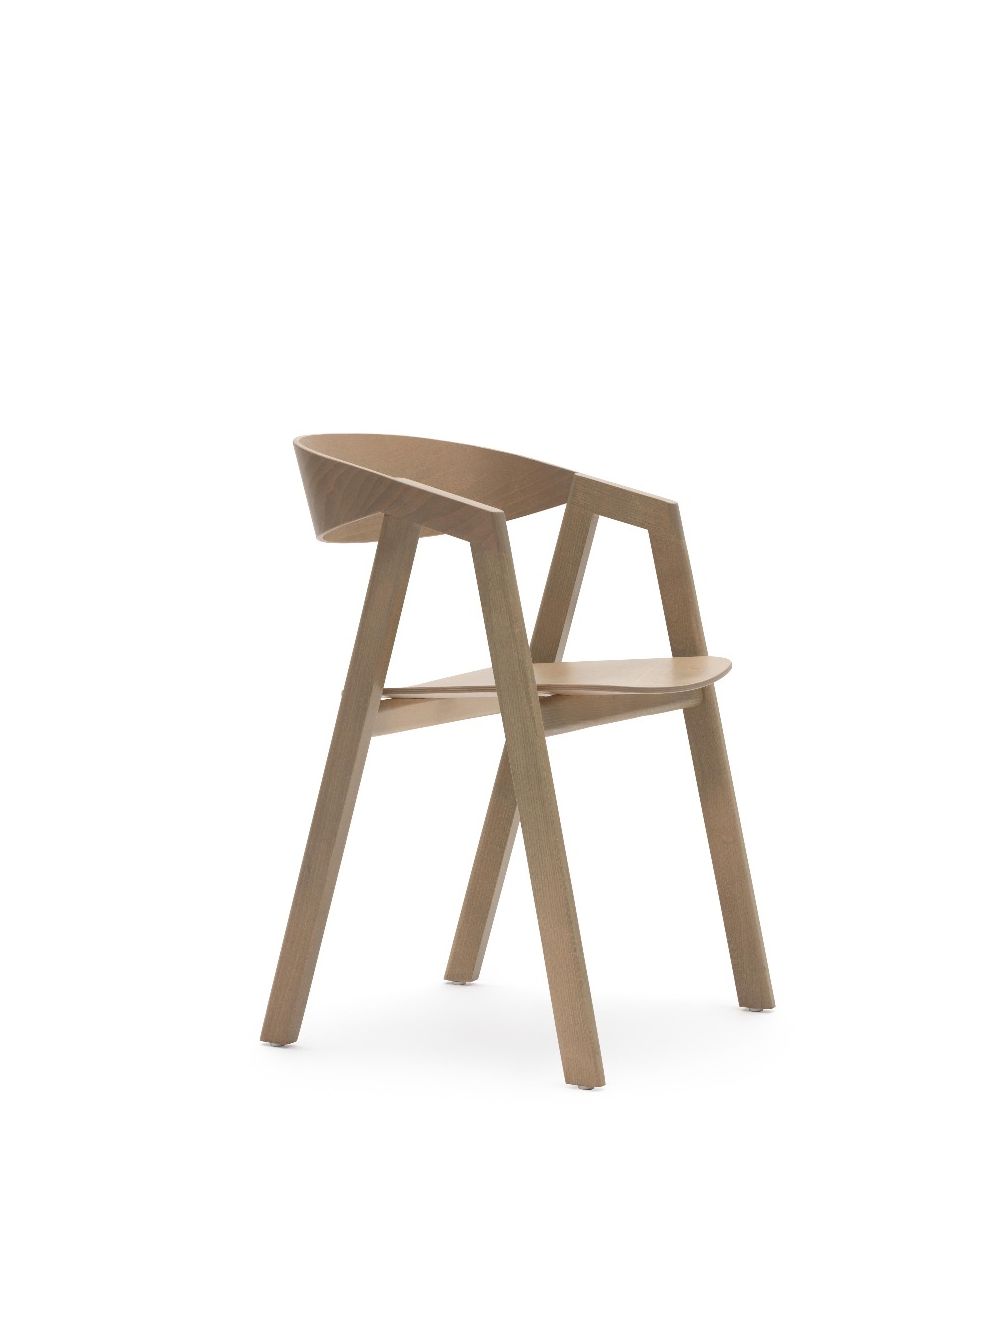 Simple Dining Chair (COM)